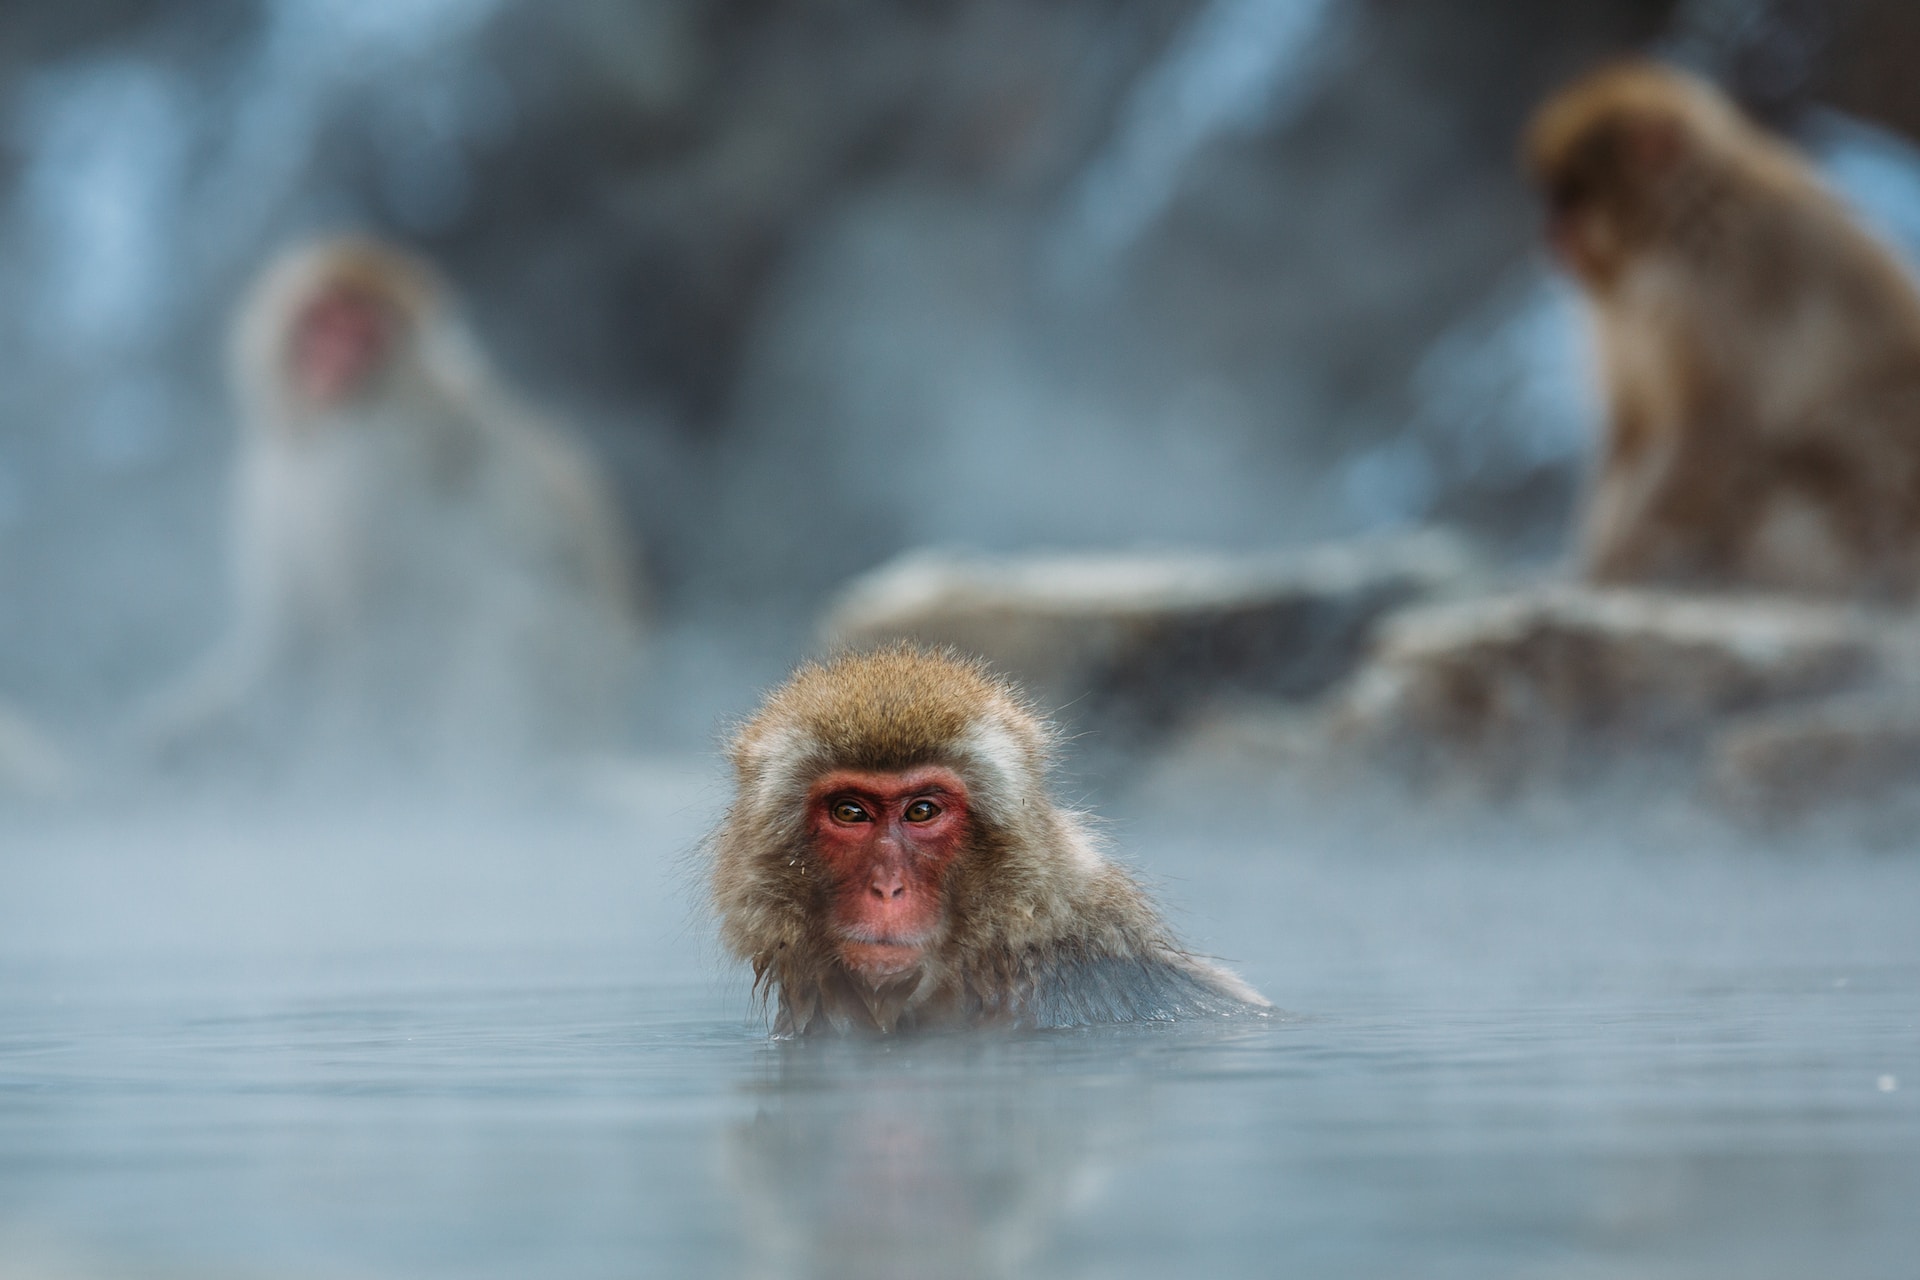 Close up of a snow monkey of Jigokundani in a hot spring